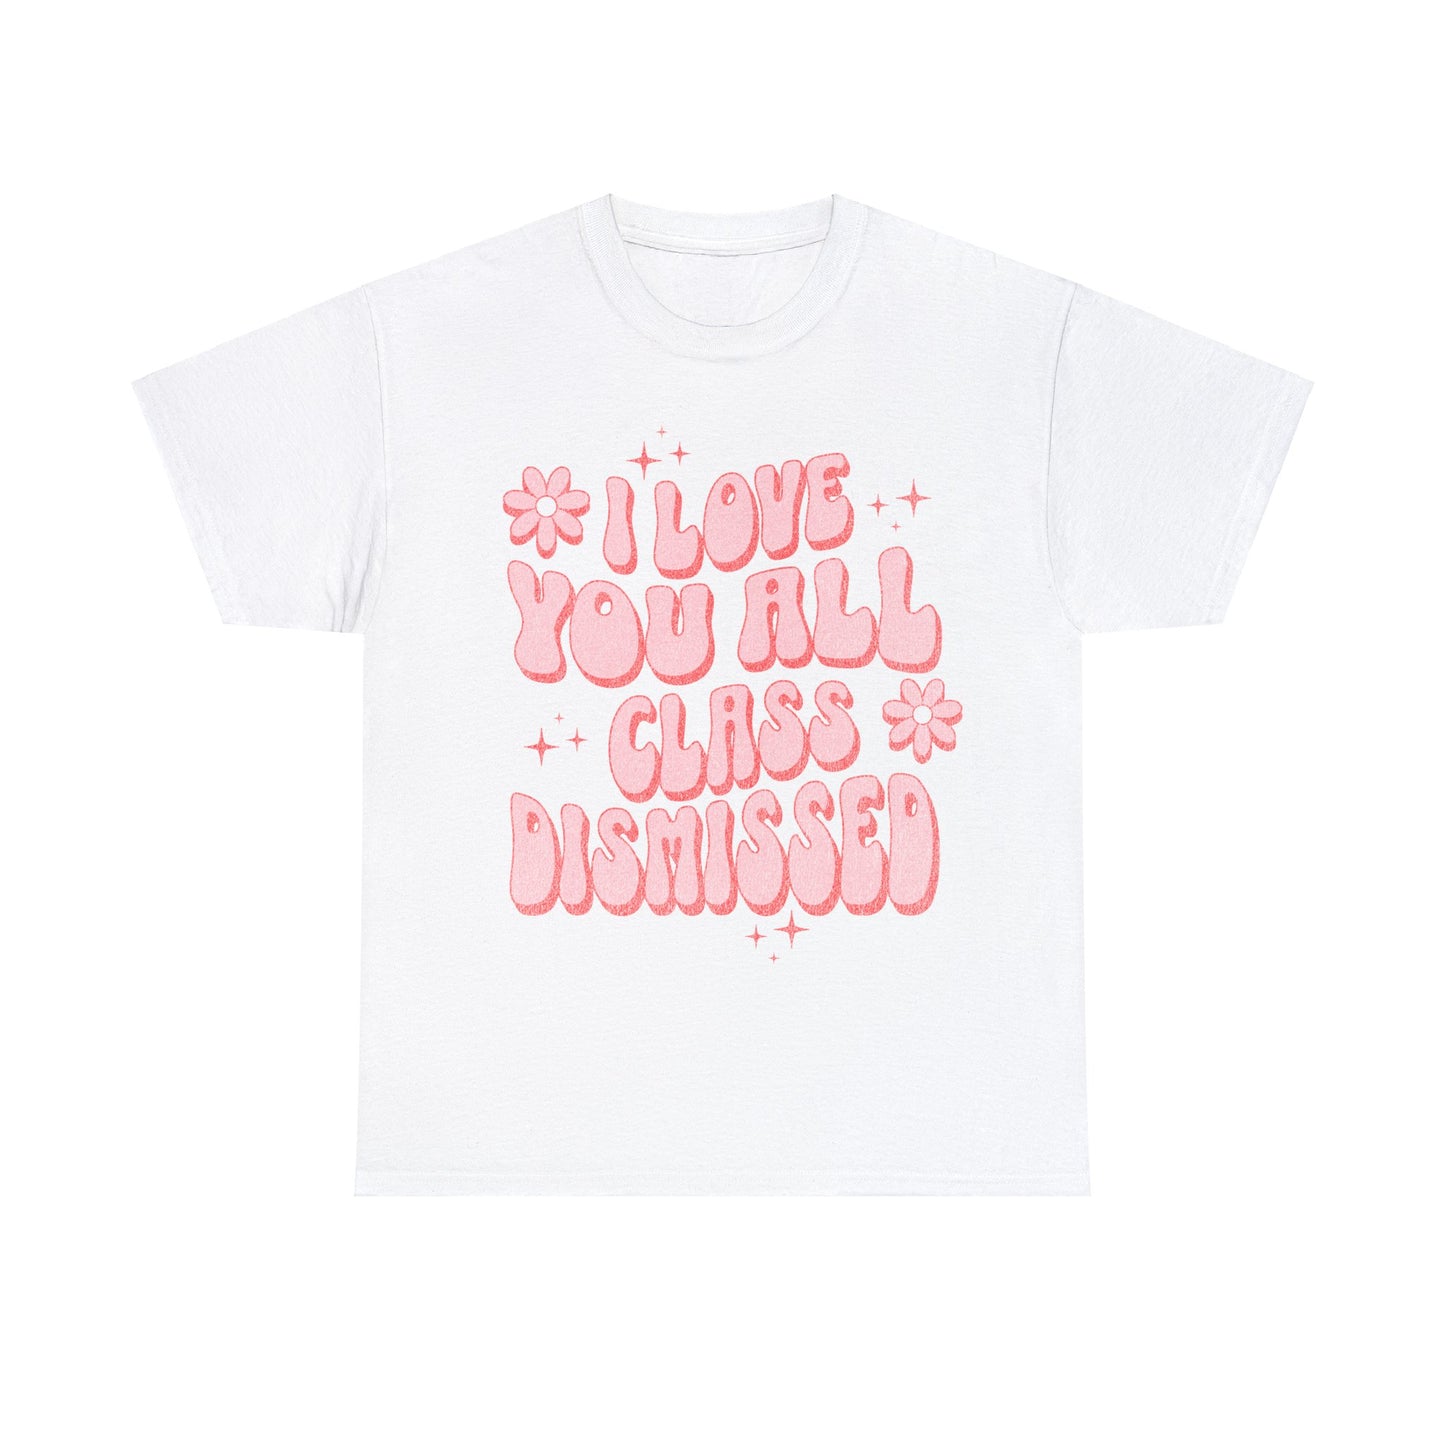 I Love You All, Class Dismissed - Unisex T-Shirt